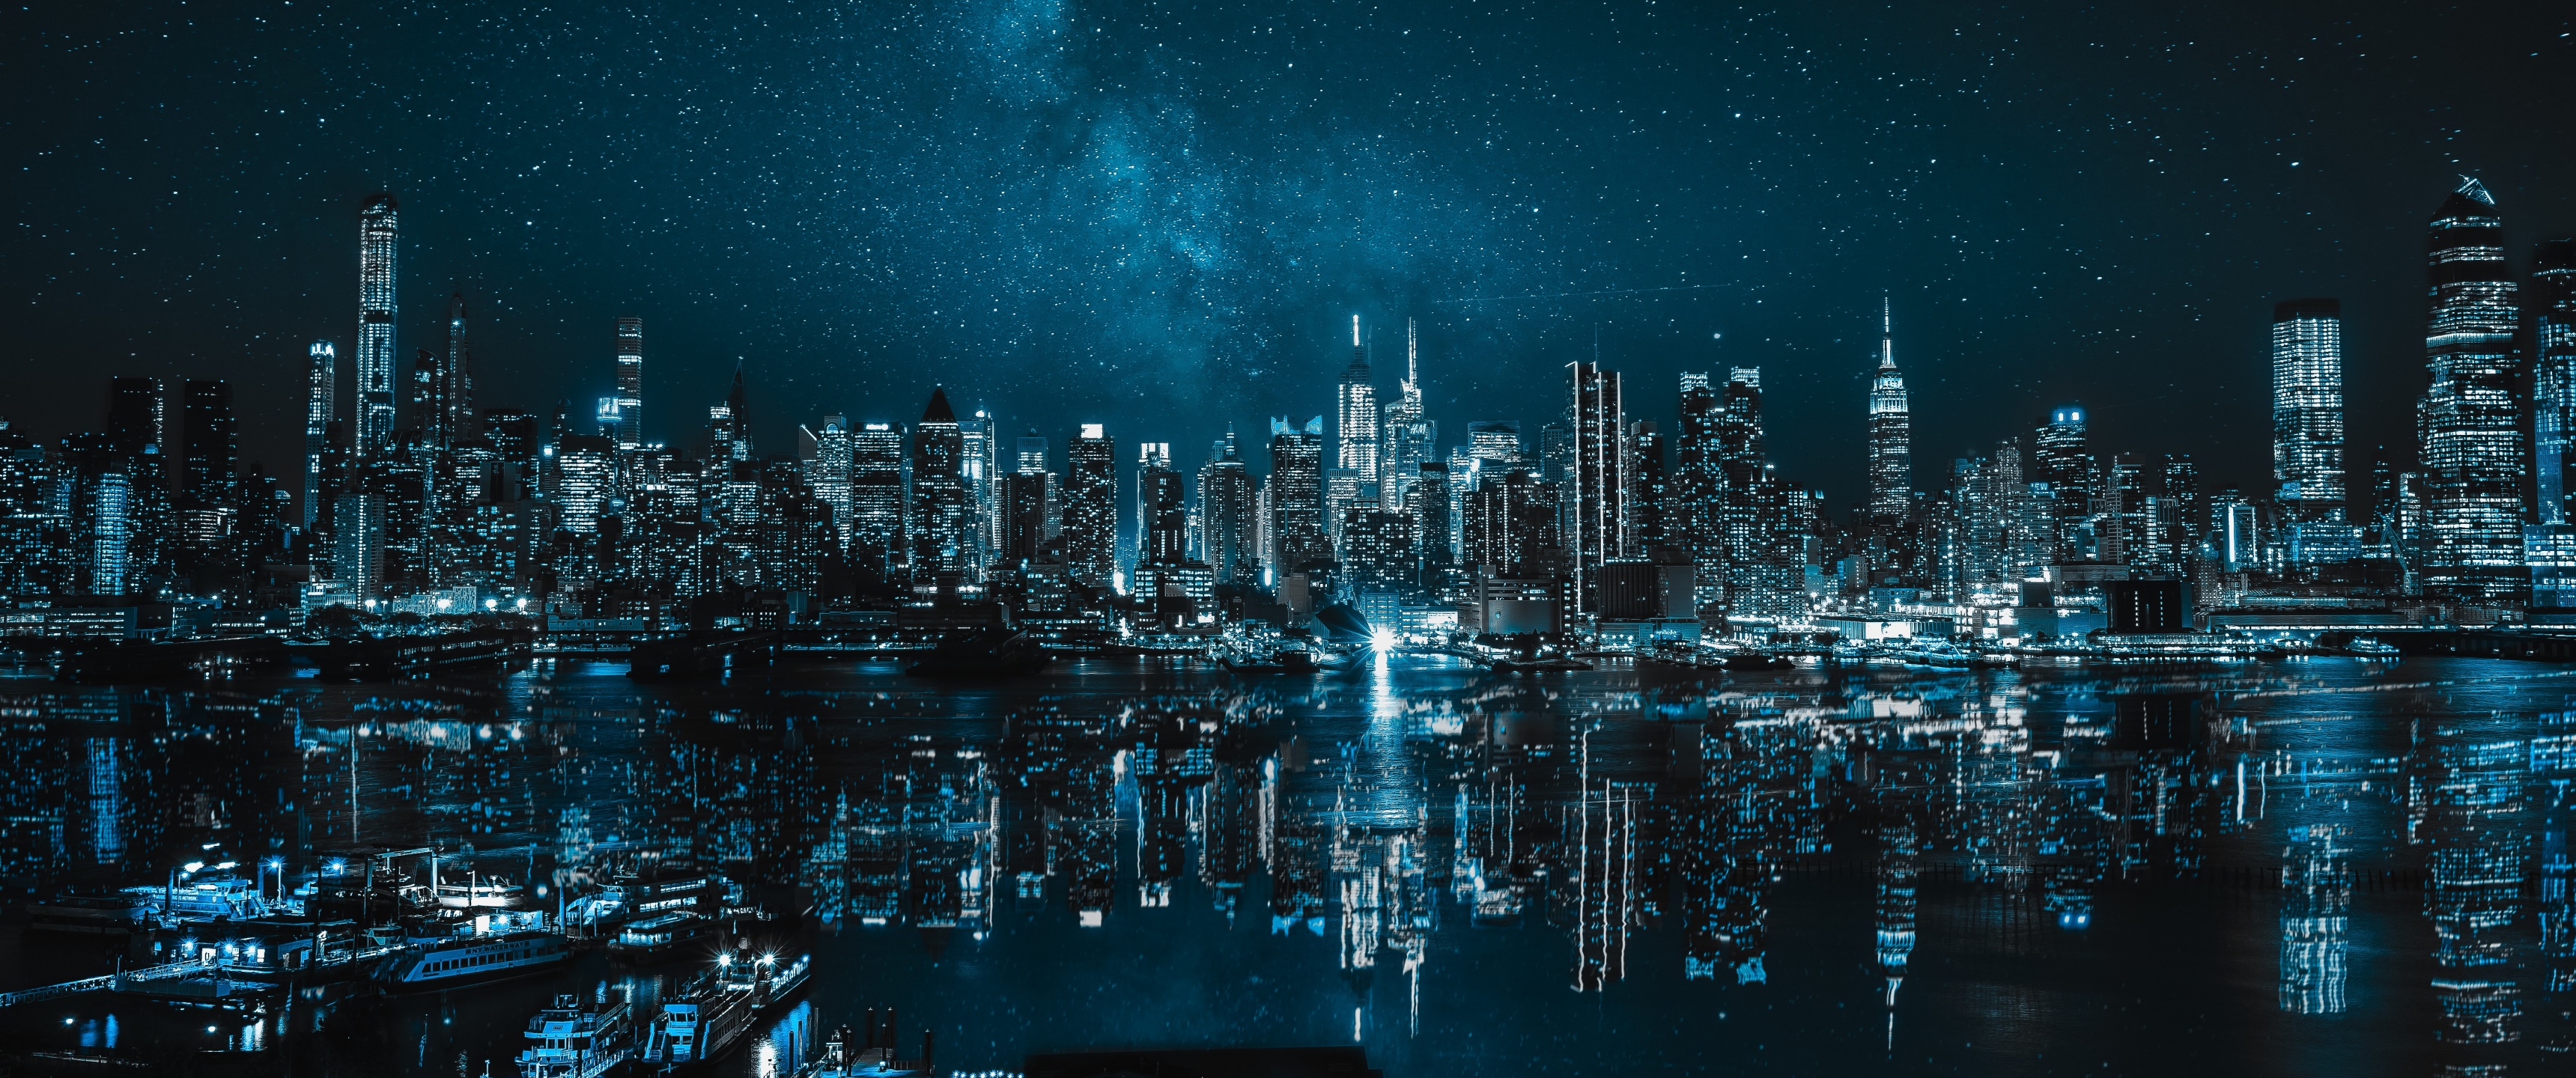 500 City Night Pictures HD  Download Free Images on Unsplash